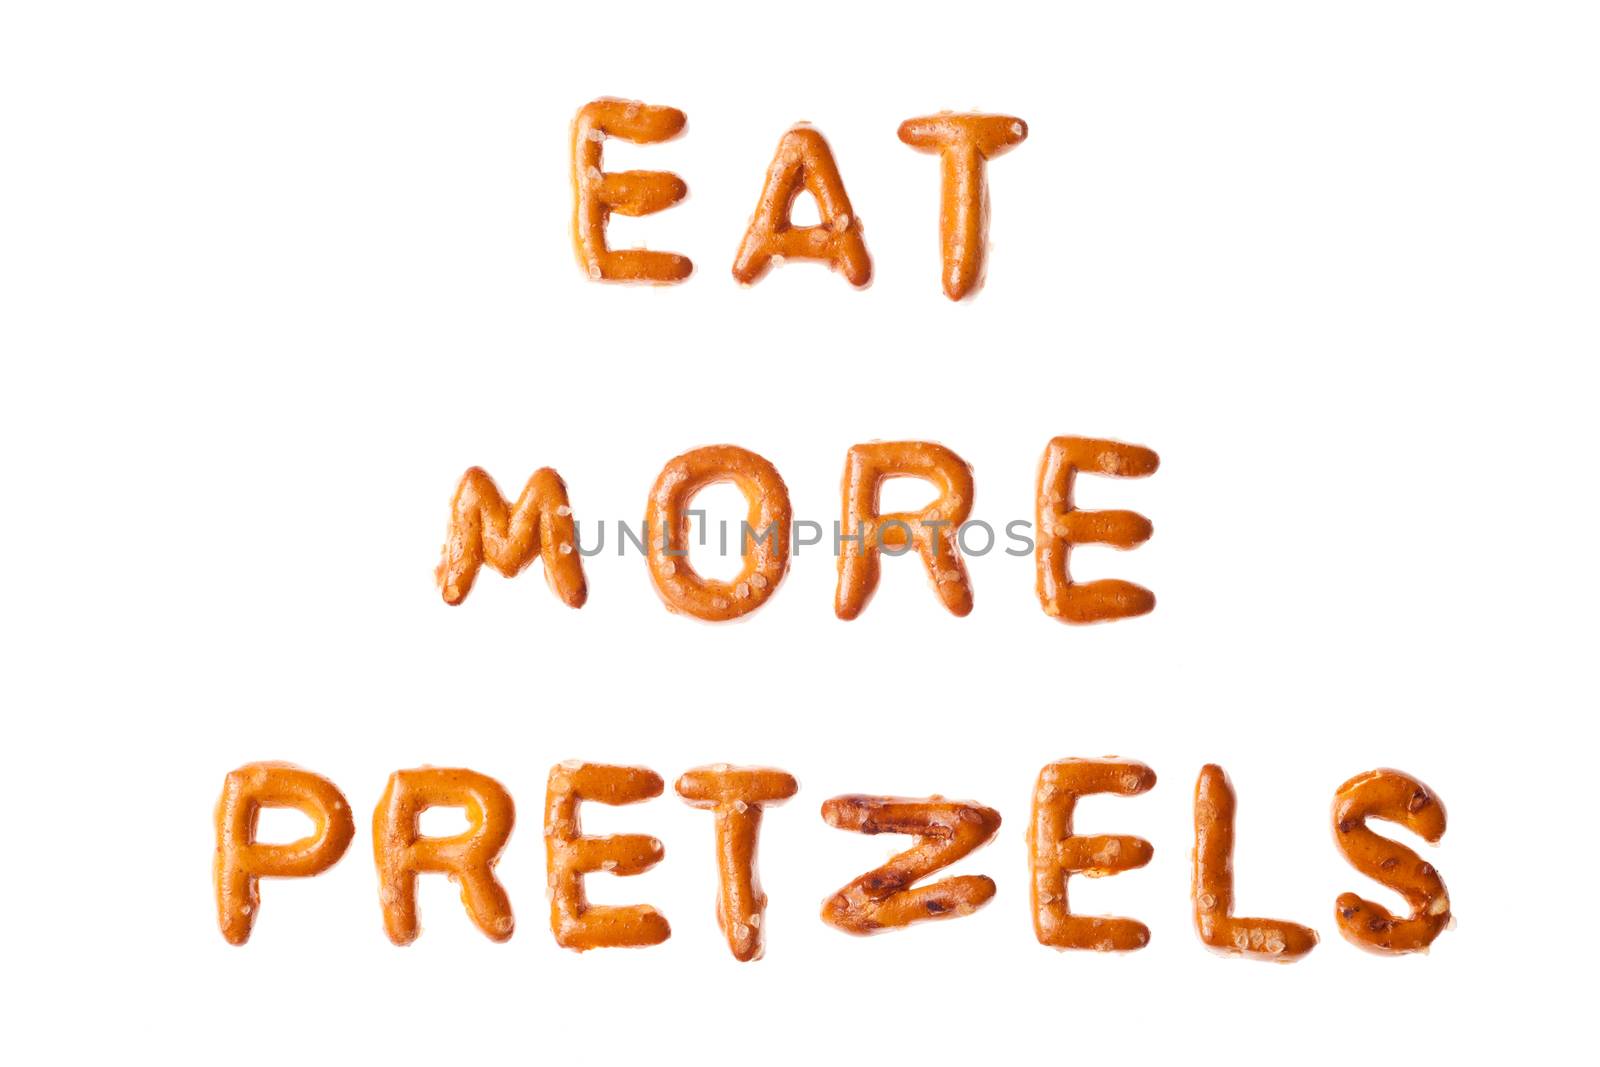 Words EAT MORE PRETZELS written, laid-out, with crispy alphabet letter pretzels isolated on white background